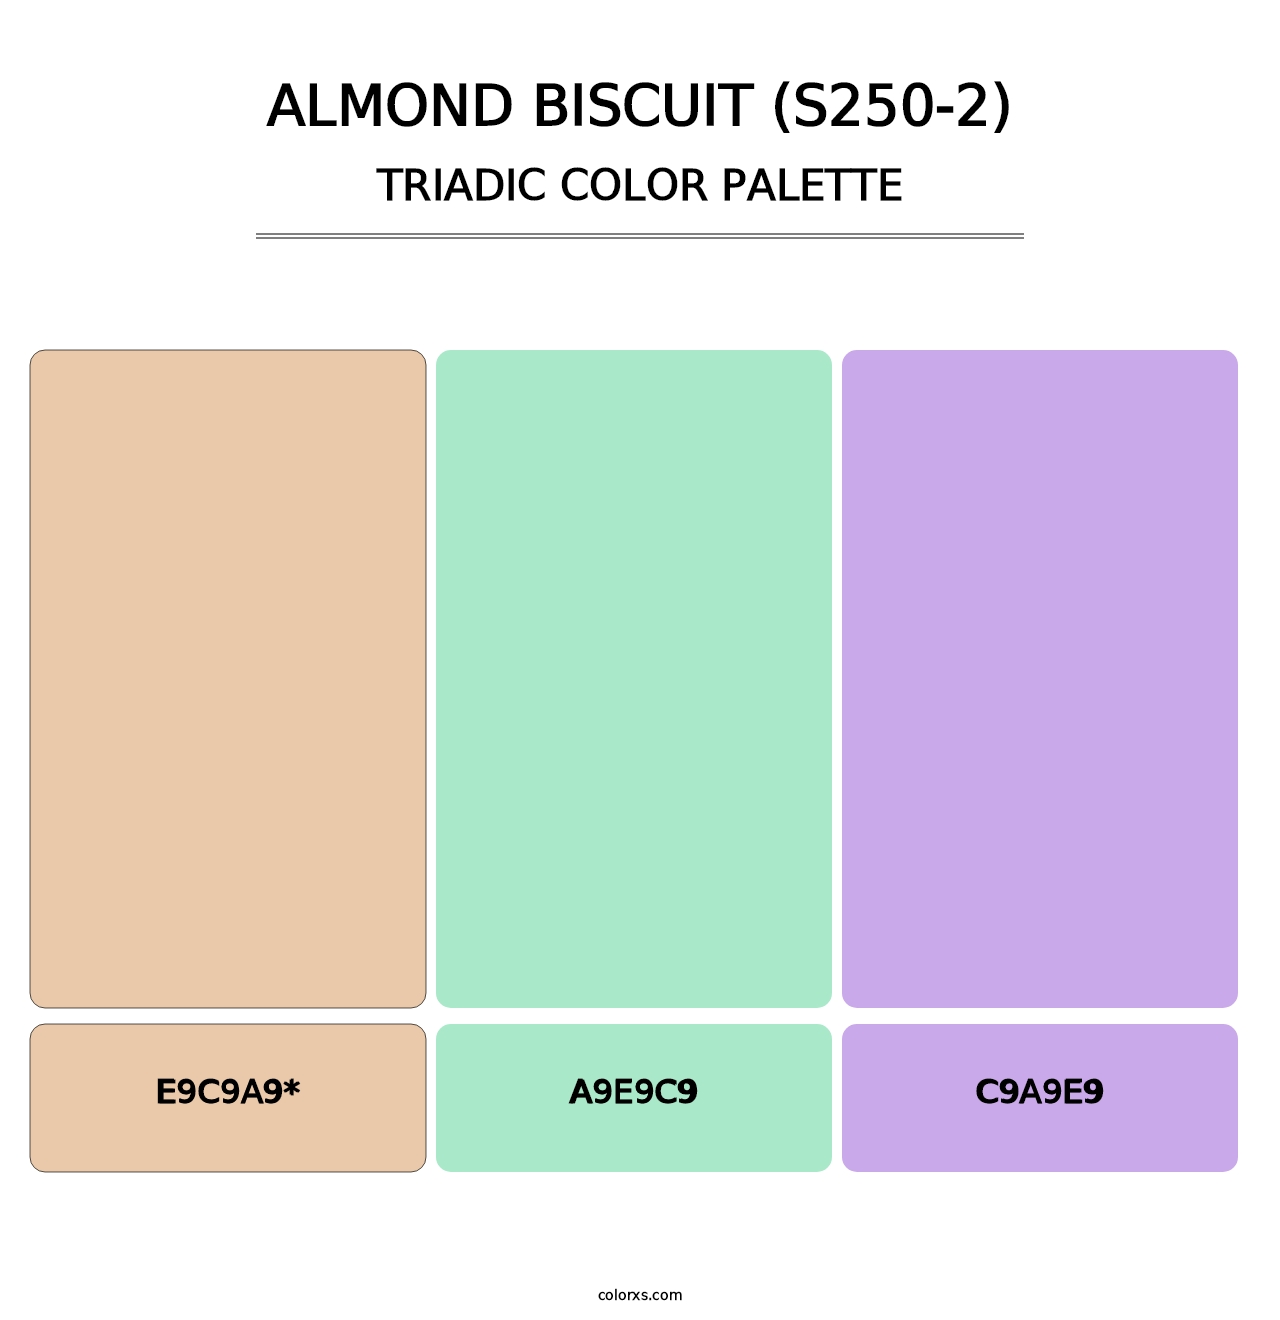 Almond Biscuit (S250-2) - Triadic Color Palette